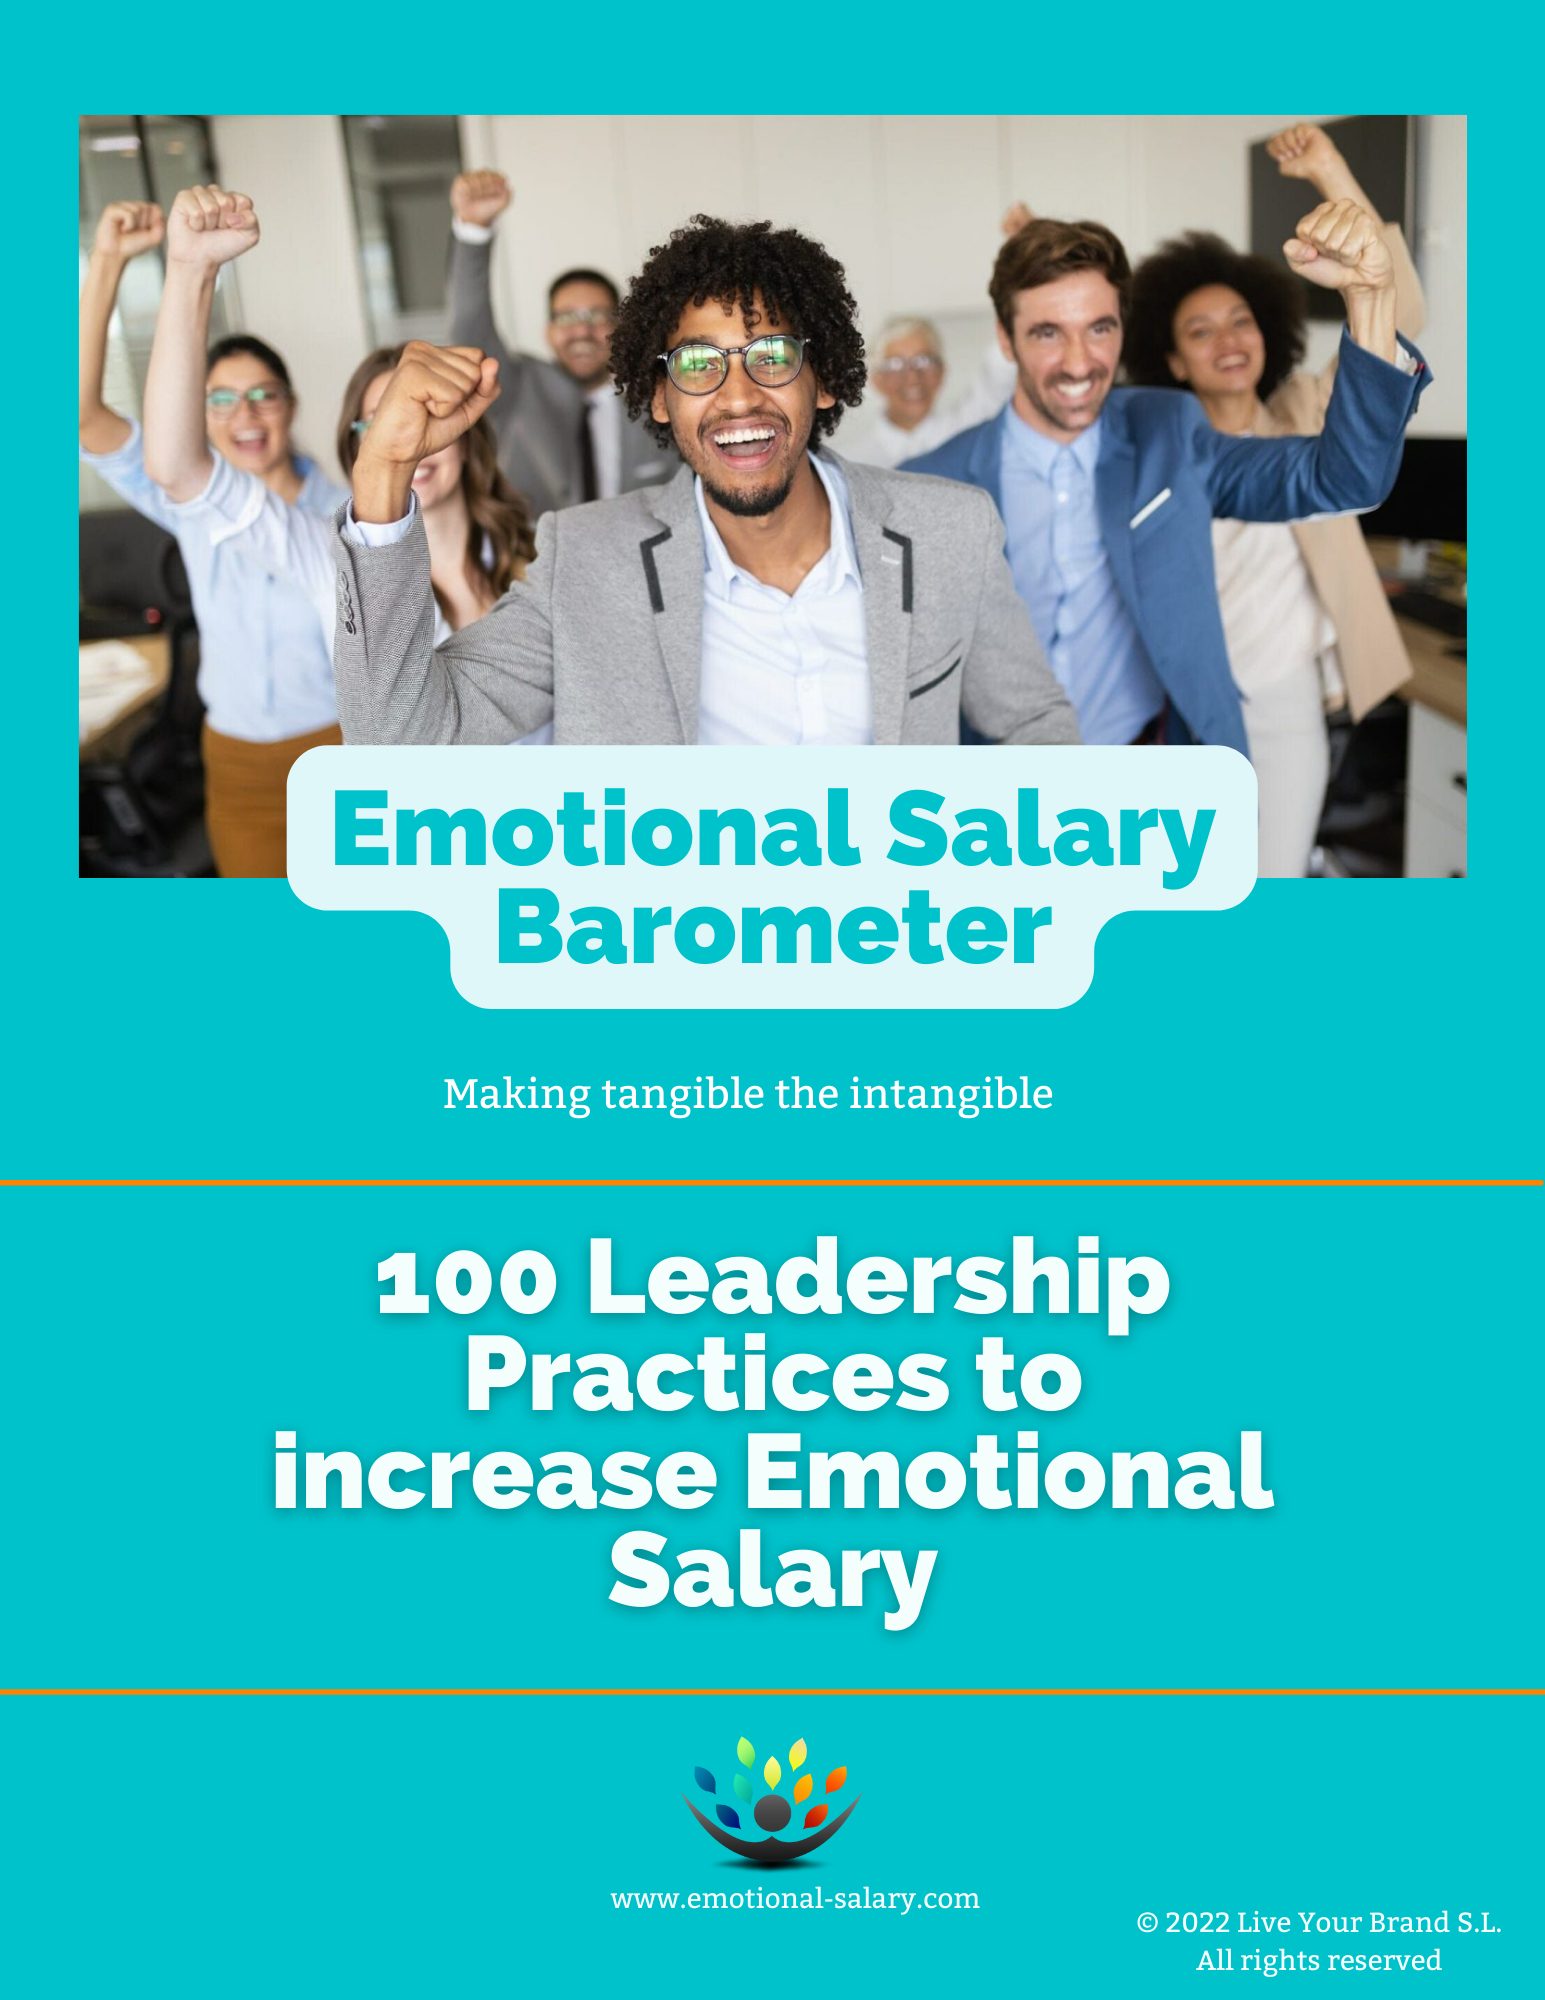 Ebook - 100 Practices for Leaders to increase Emotional Salary